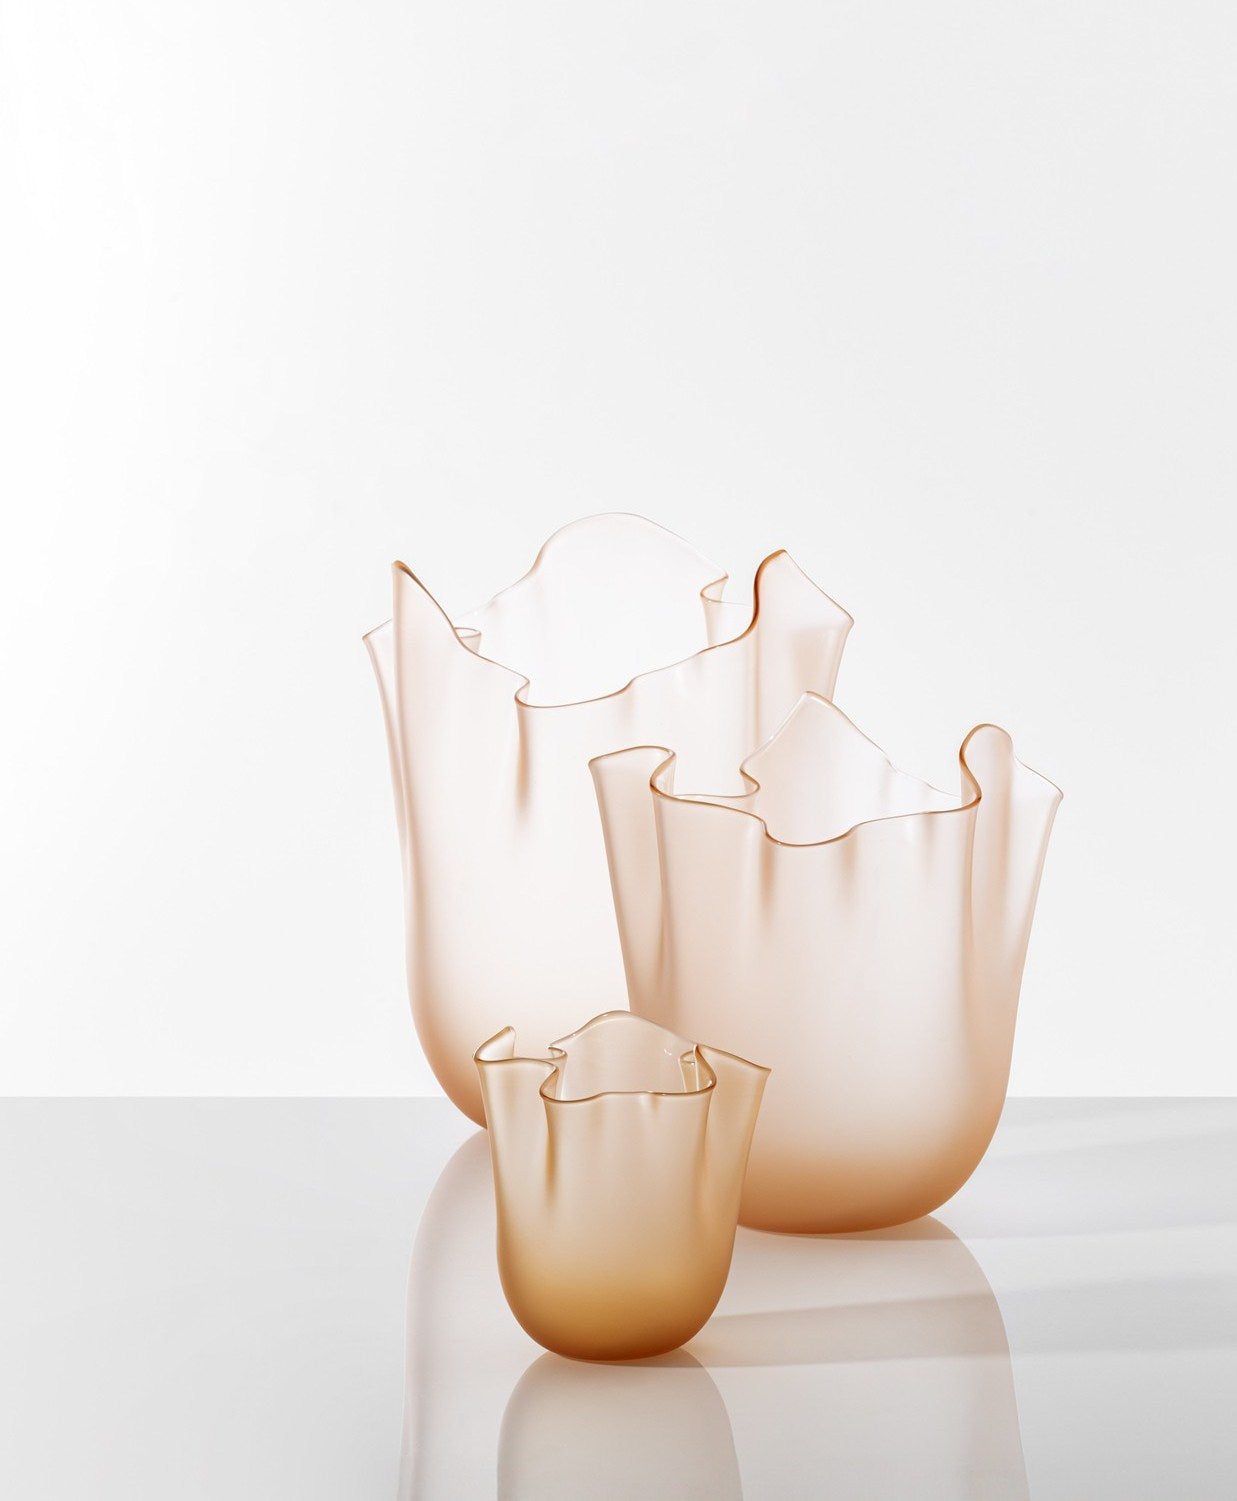 Fazzoletto Vase by Venini | Soft shape with a wavy, moved hem, uniquely crafted with the flying hand technique | Designer: Fulvio Bianconi and Paolo Venini | Available in matte or glossy, opale or transparent finishes | Home Decor Vases | 2Jour Concierge, your luxury lifestyle shop